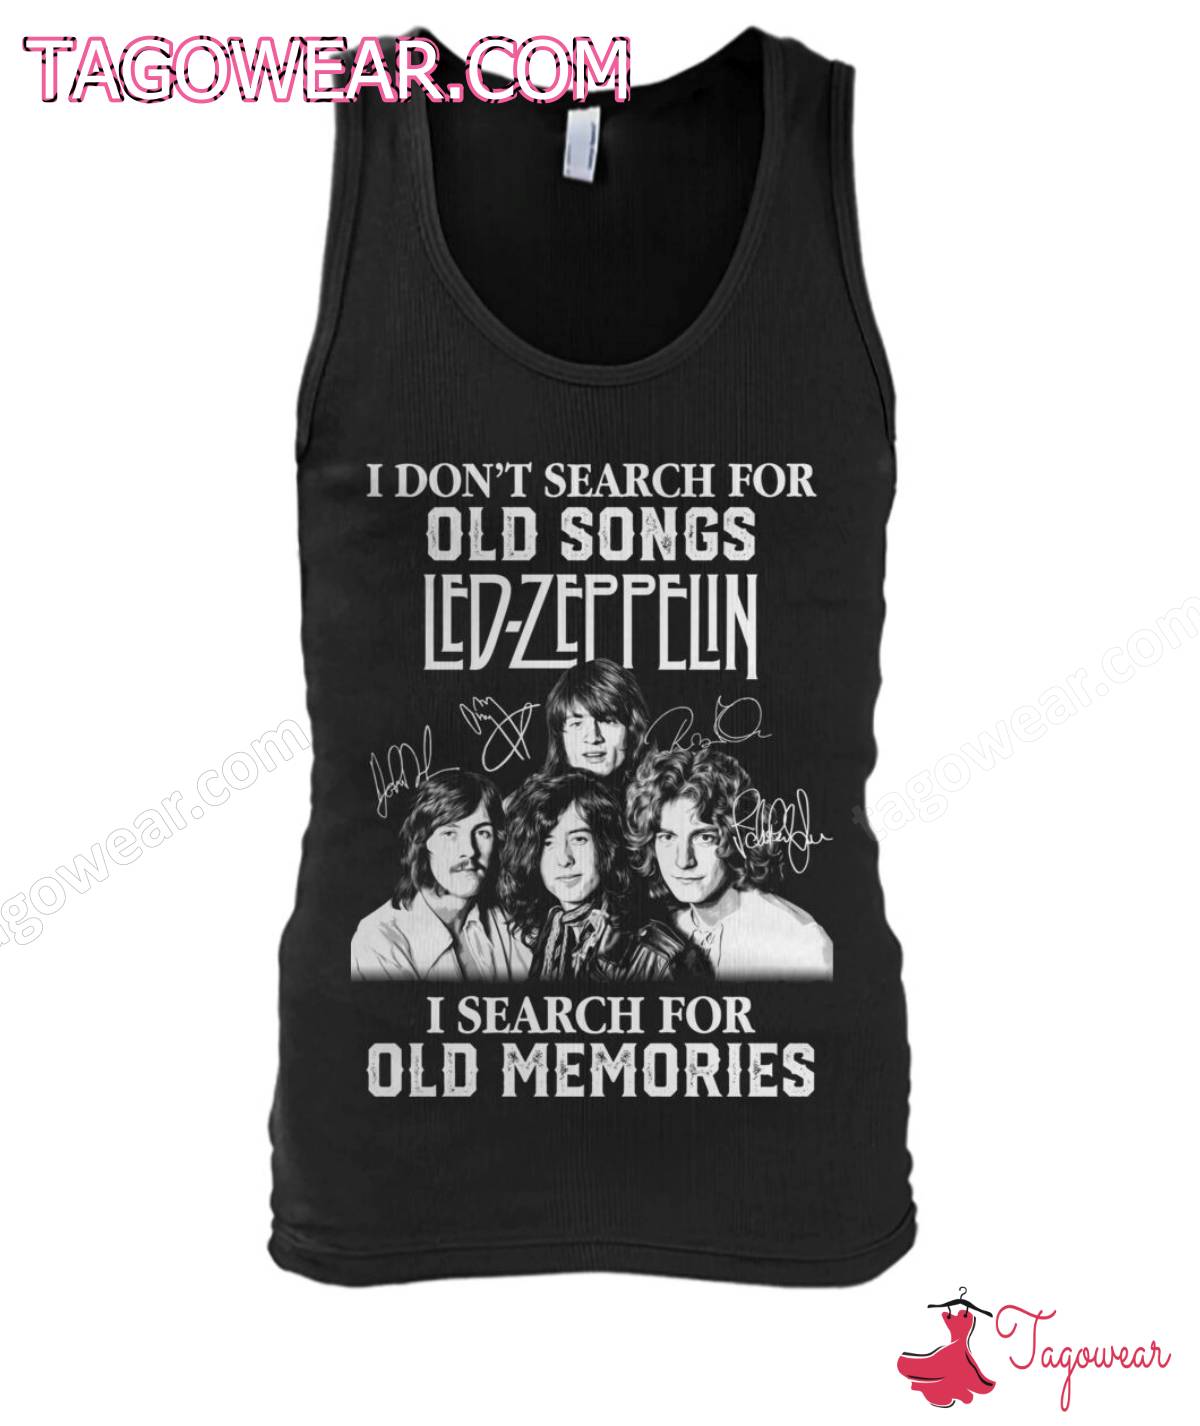 I Don't Search For Old Songs Led-zeppelin I Search For Old Memories Shirt, Tank Top c